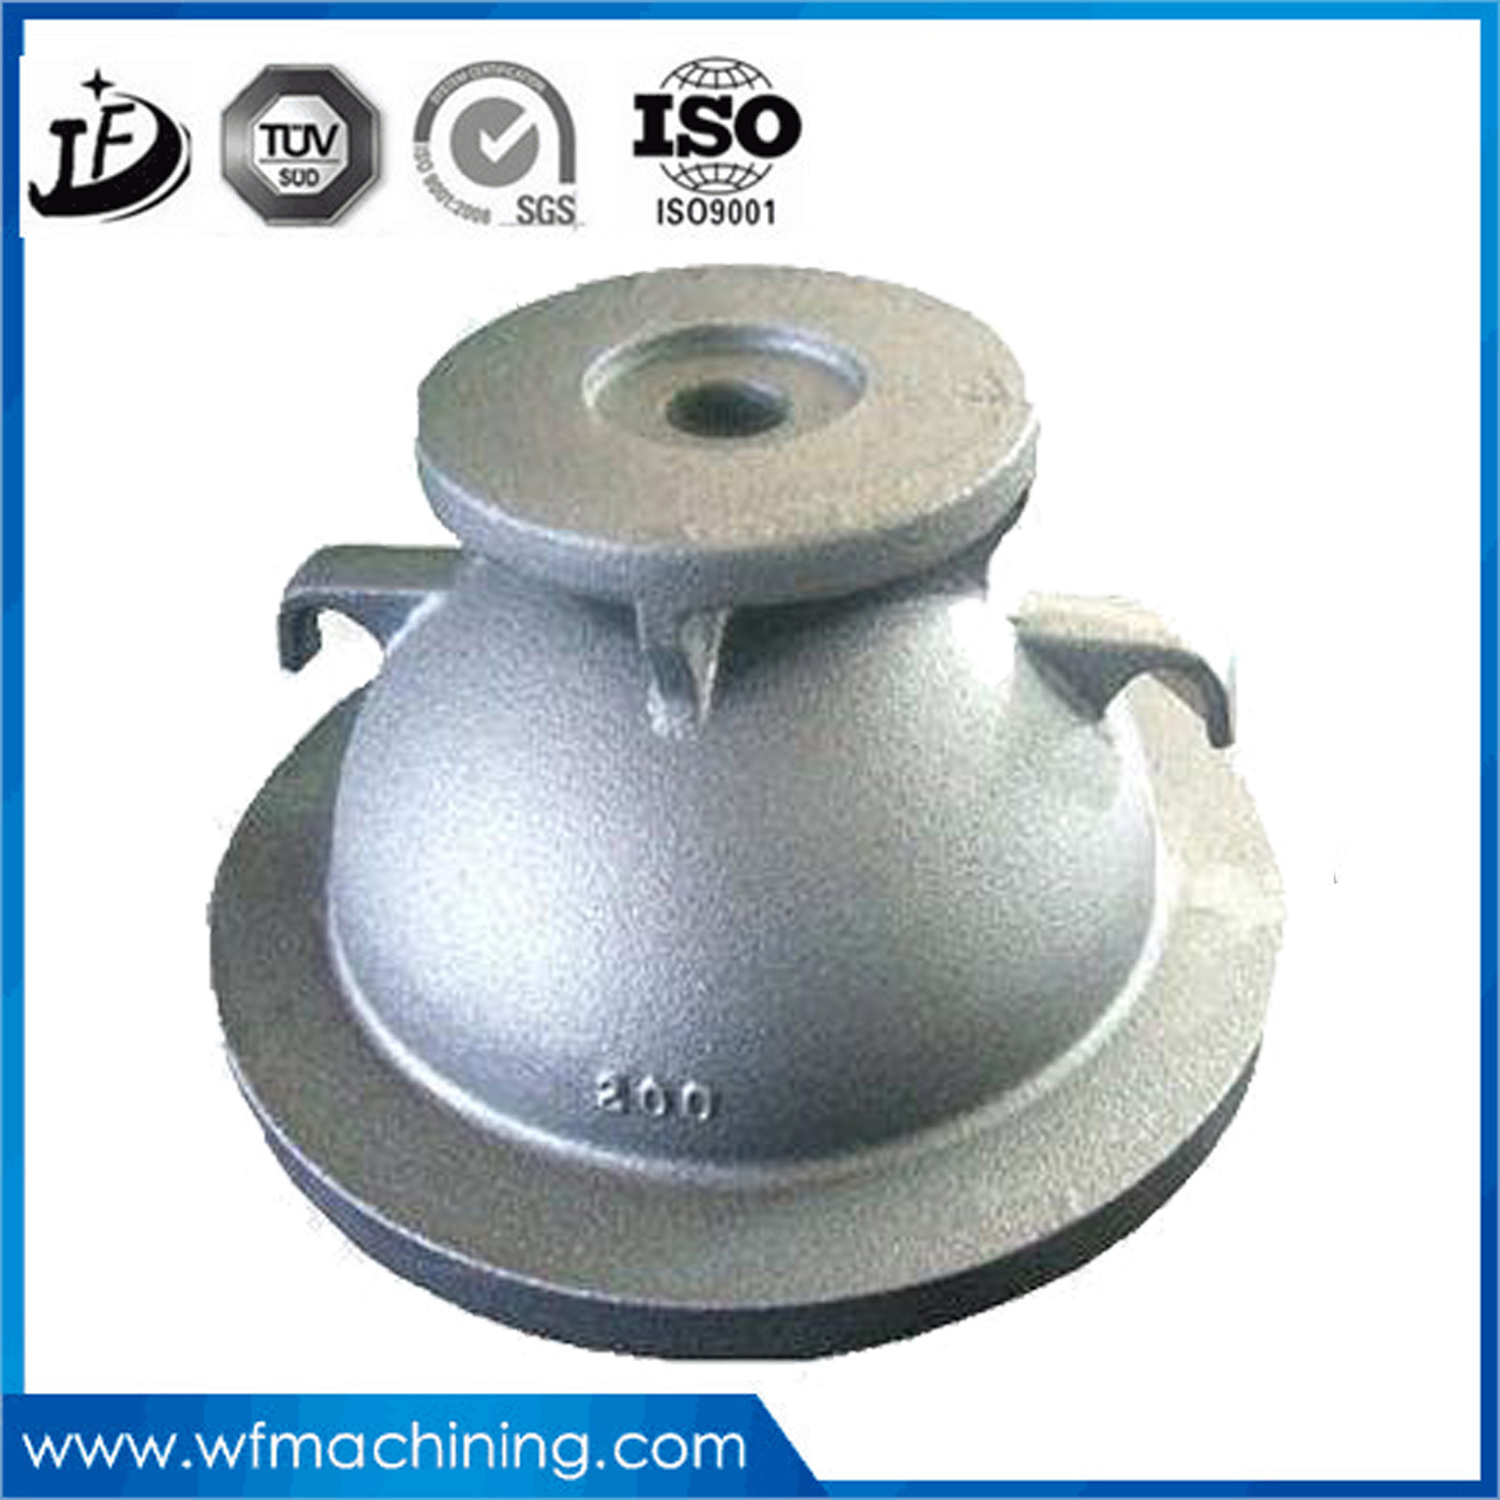 OEM and Customized Cast Iron Sand Casting ASTM/GB Valve Parts for Agriculture/Farming Machinery